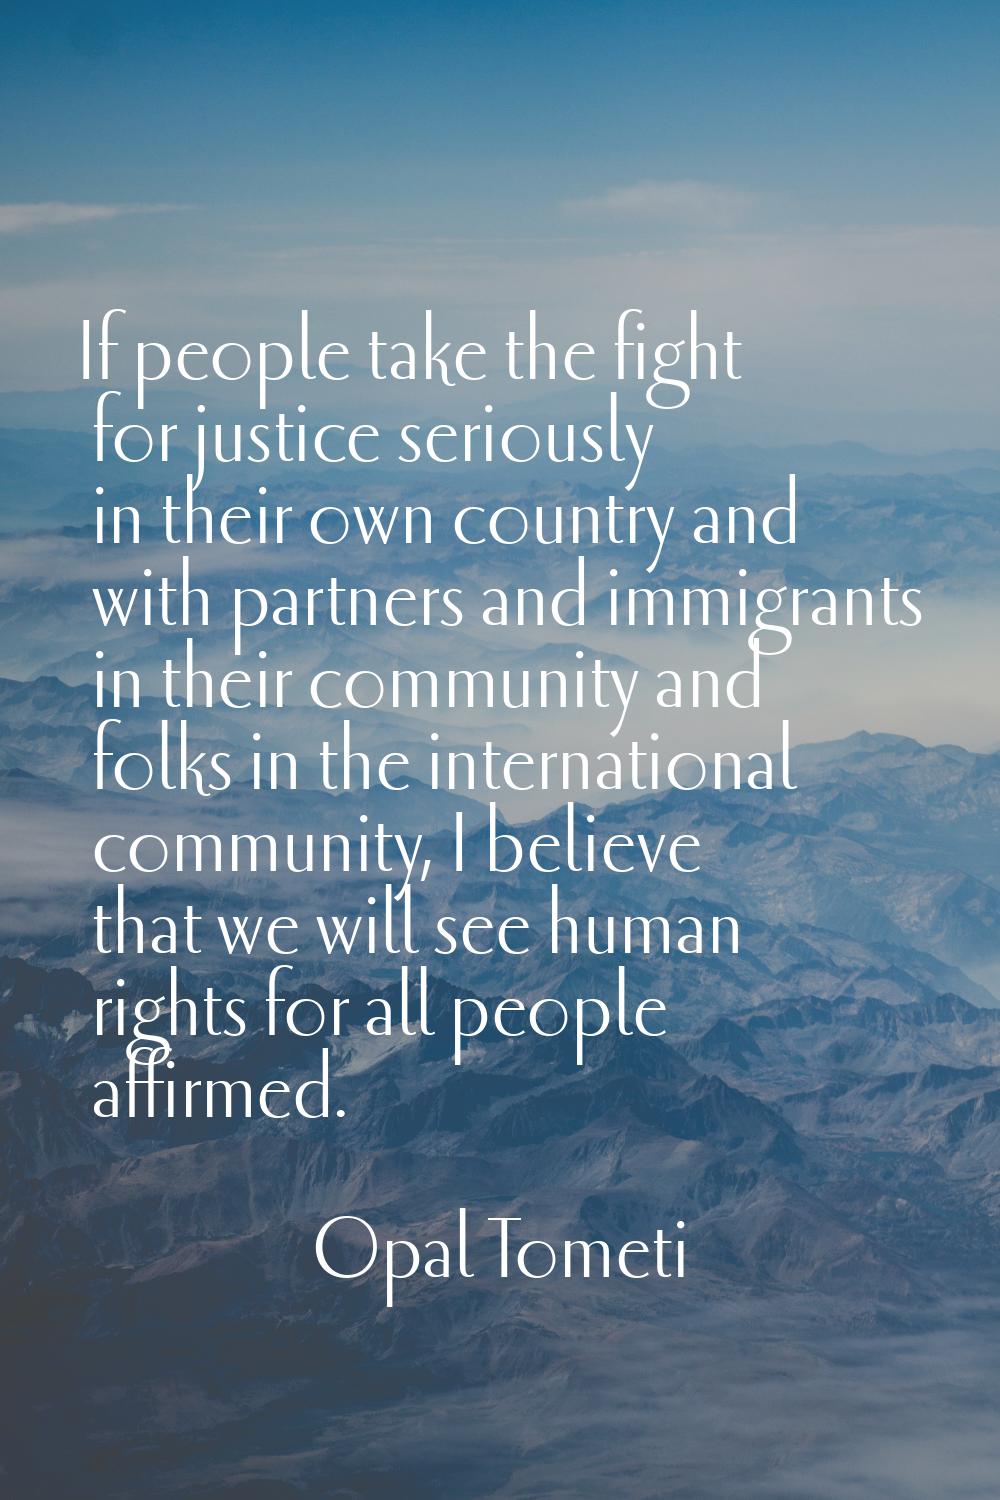 If people take the fight for justice seriously in their own country and with partners and immigrant